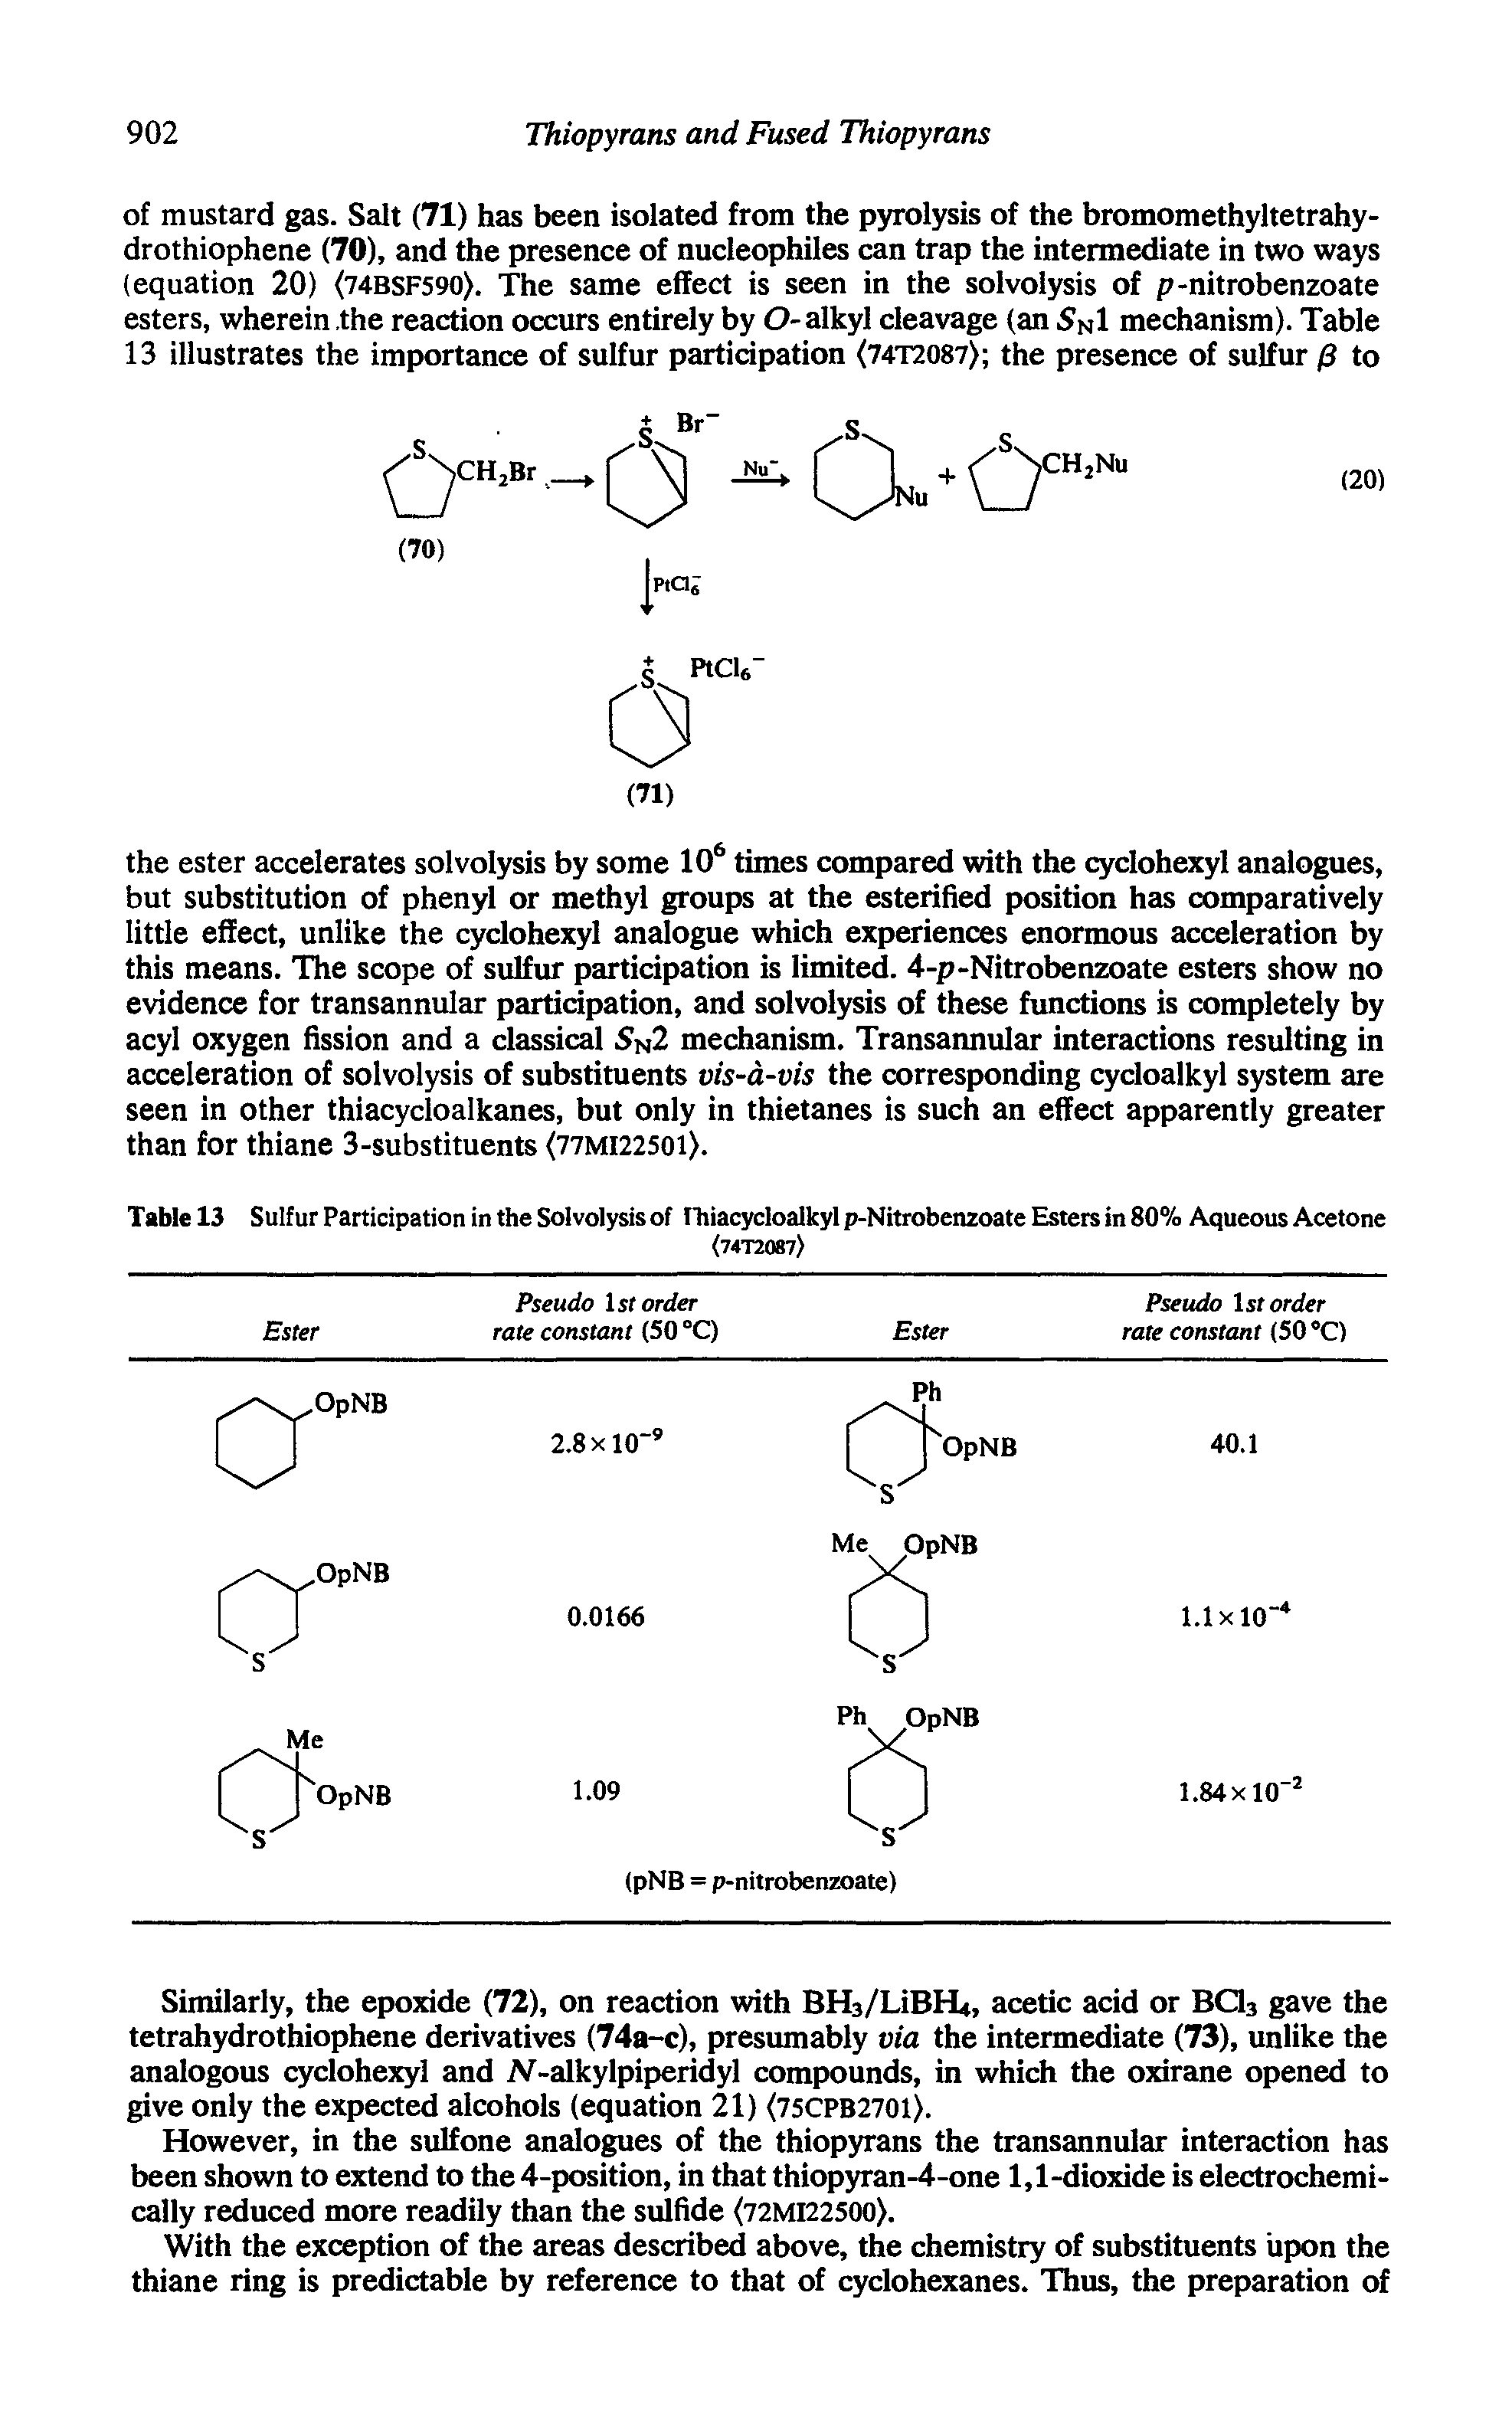 Table 13 Sulfur Participation in the Solvolysis of rhiacycloalkyl p-Nitrobenzoate Esters in 80% Aqueous Acetone...